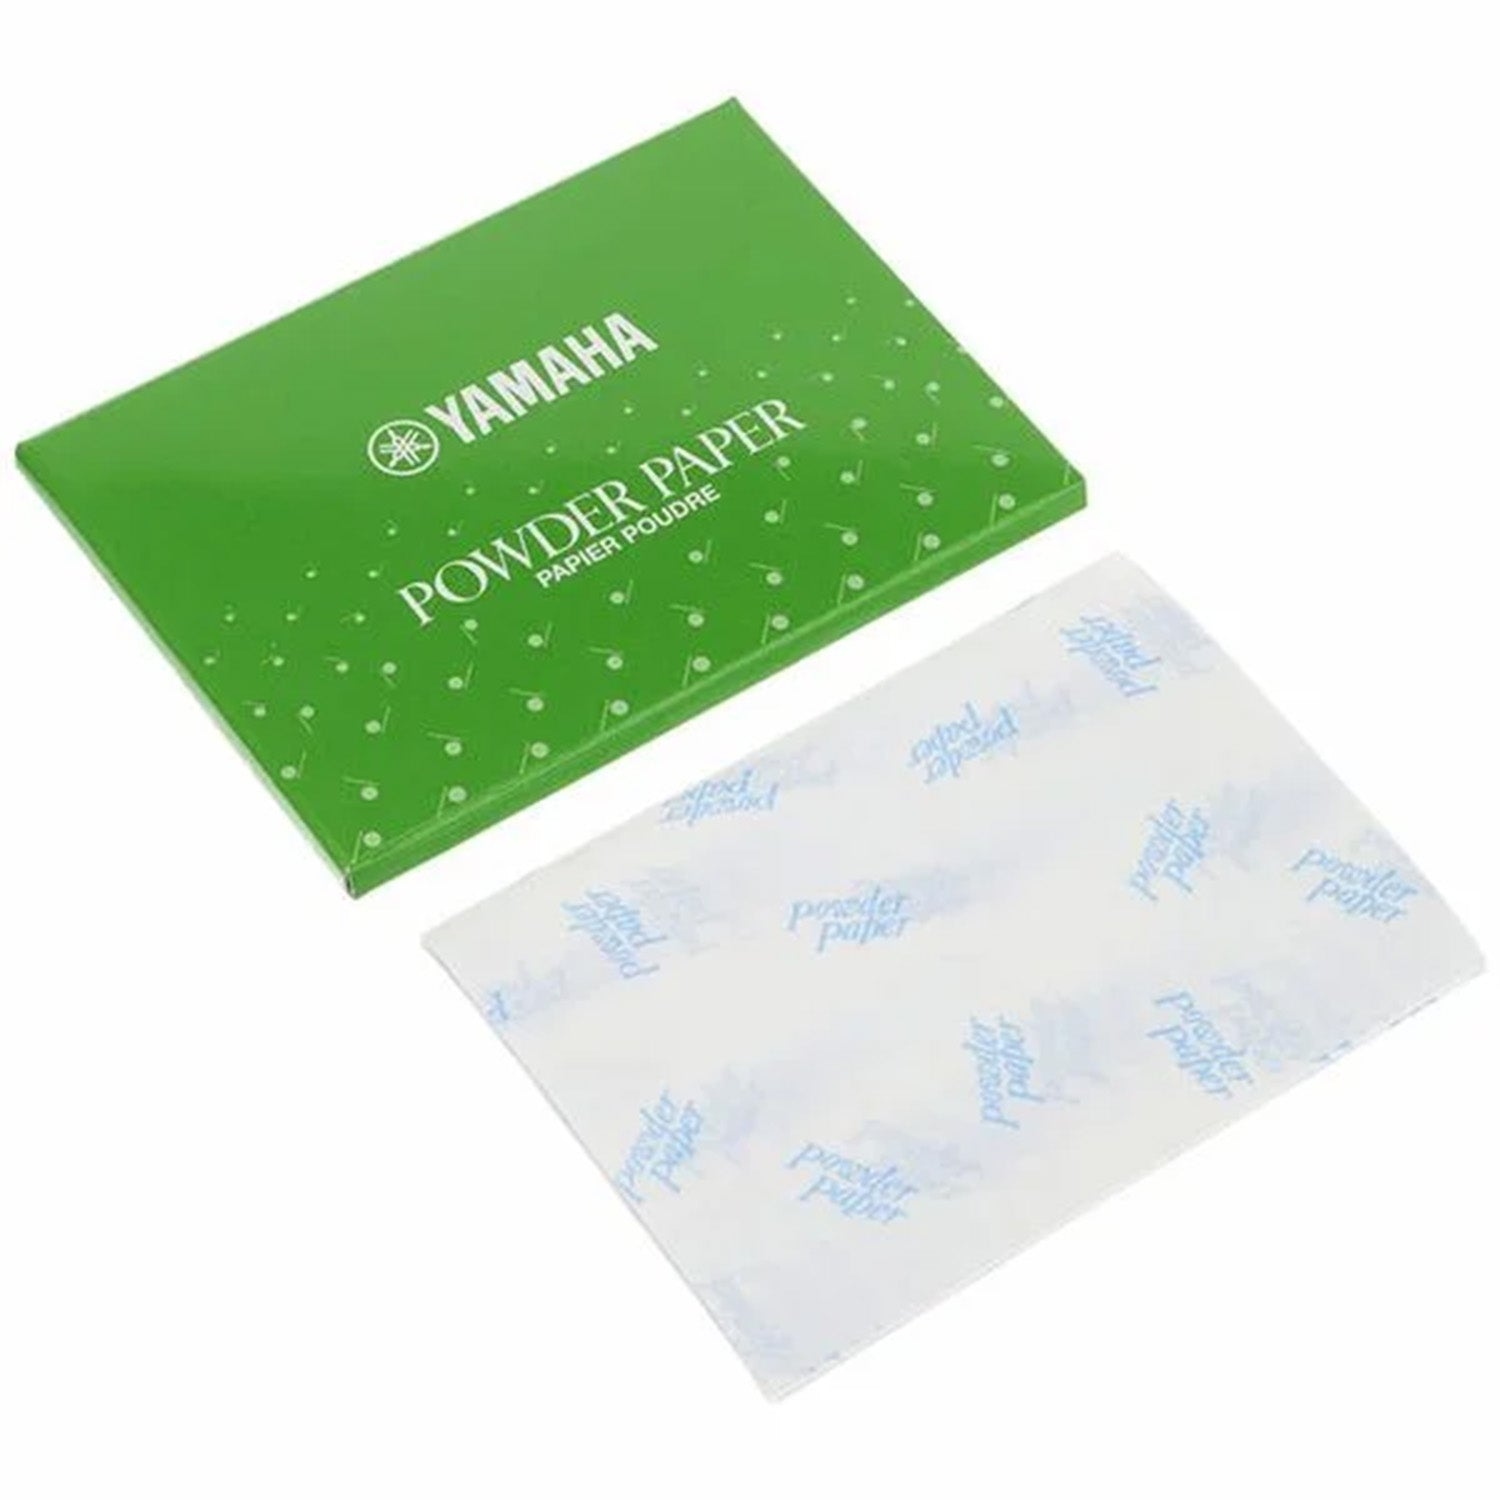 light green Yamaha powder paper package with a sample paper laid out next to it, on a white background